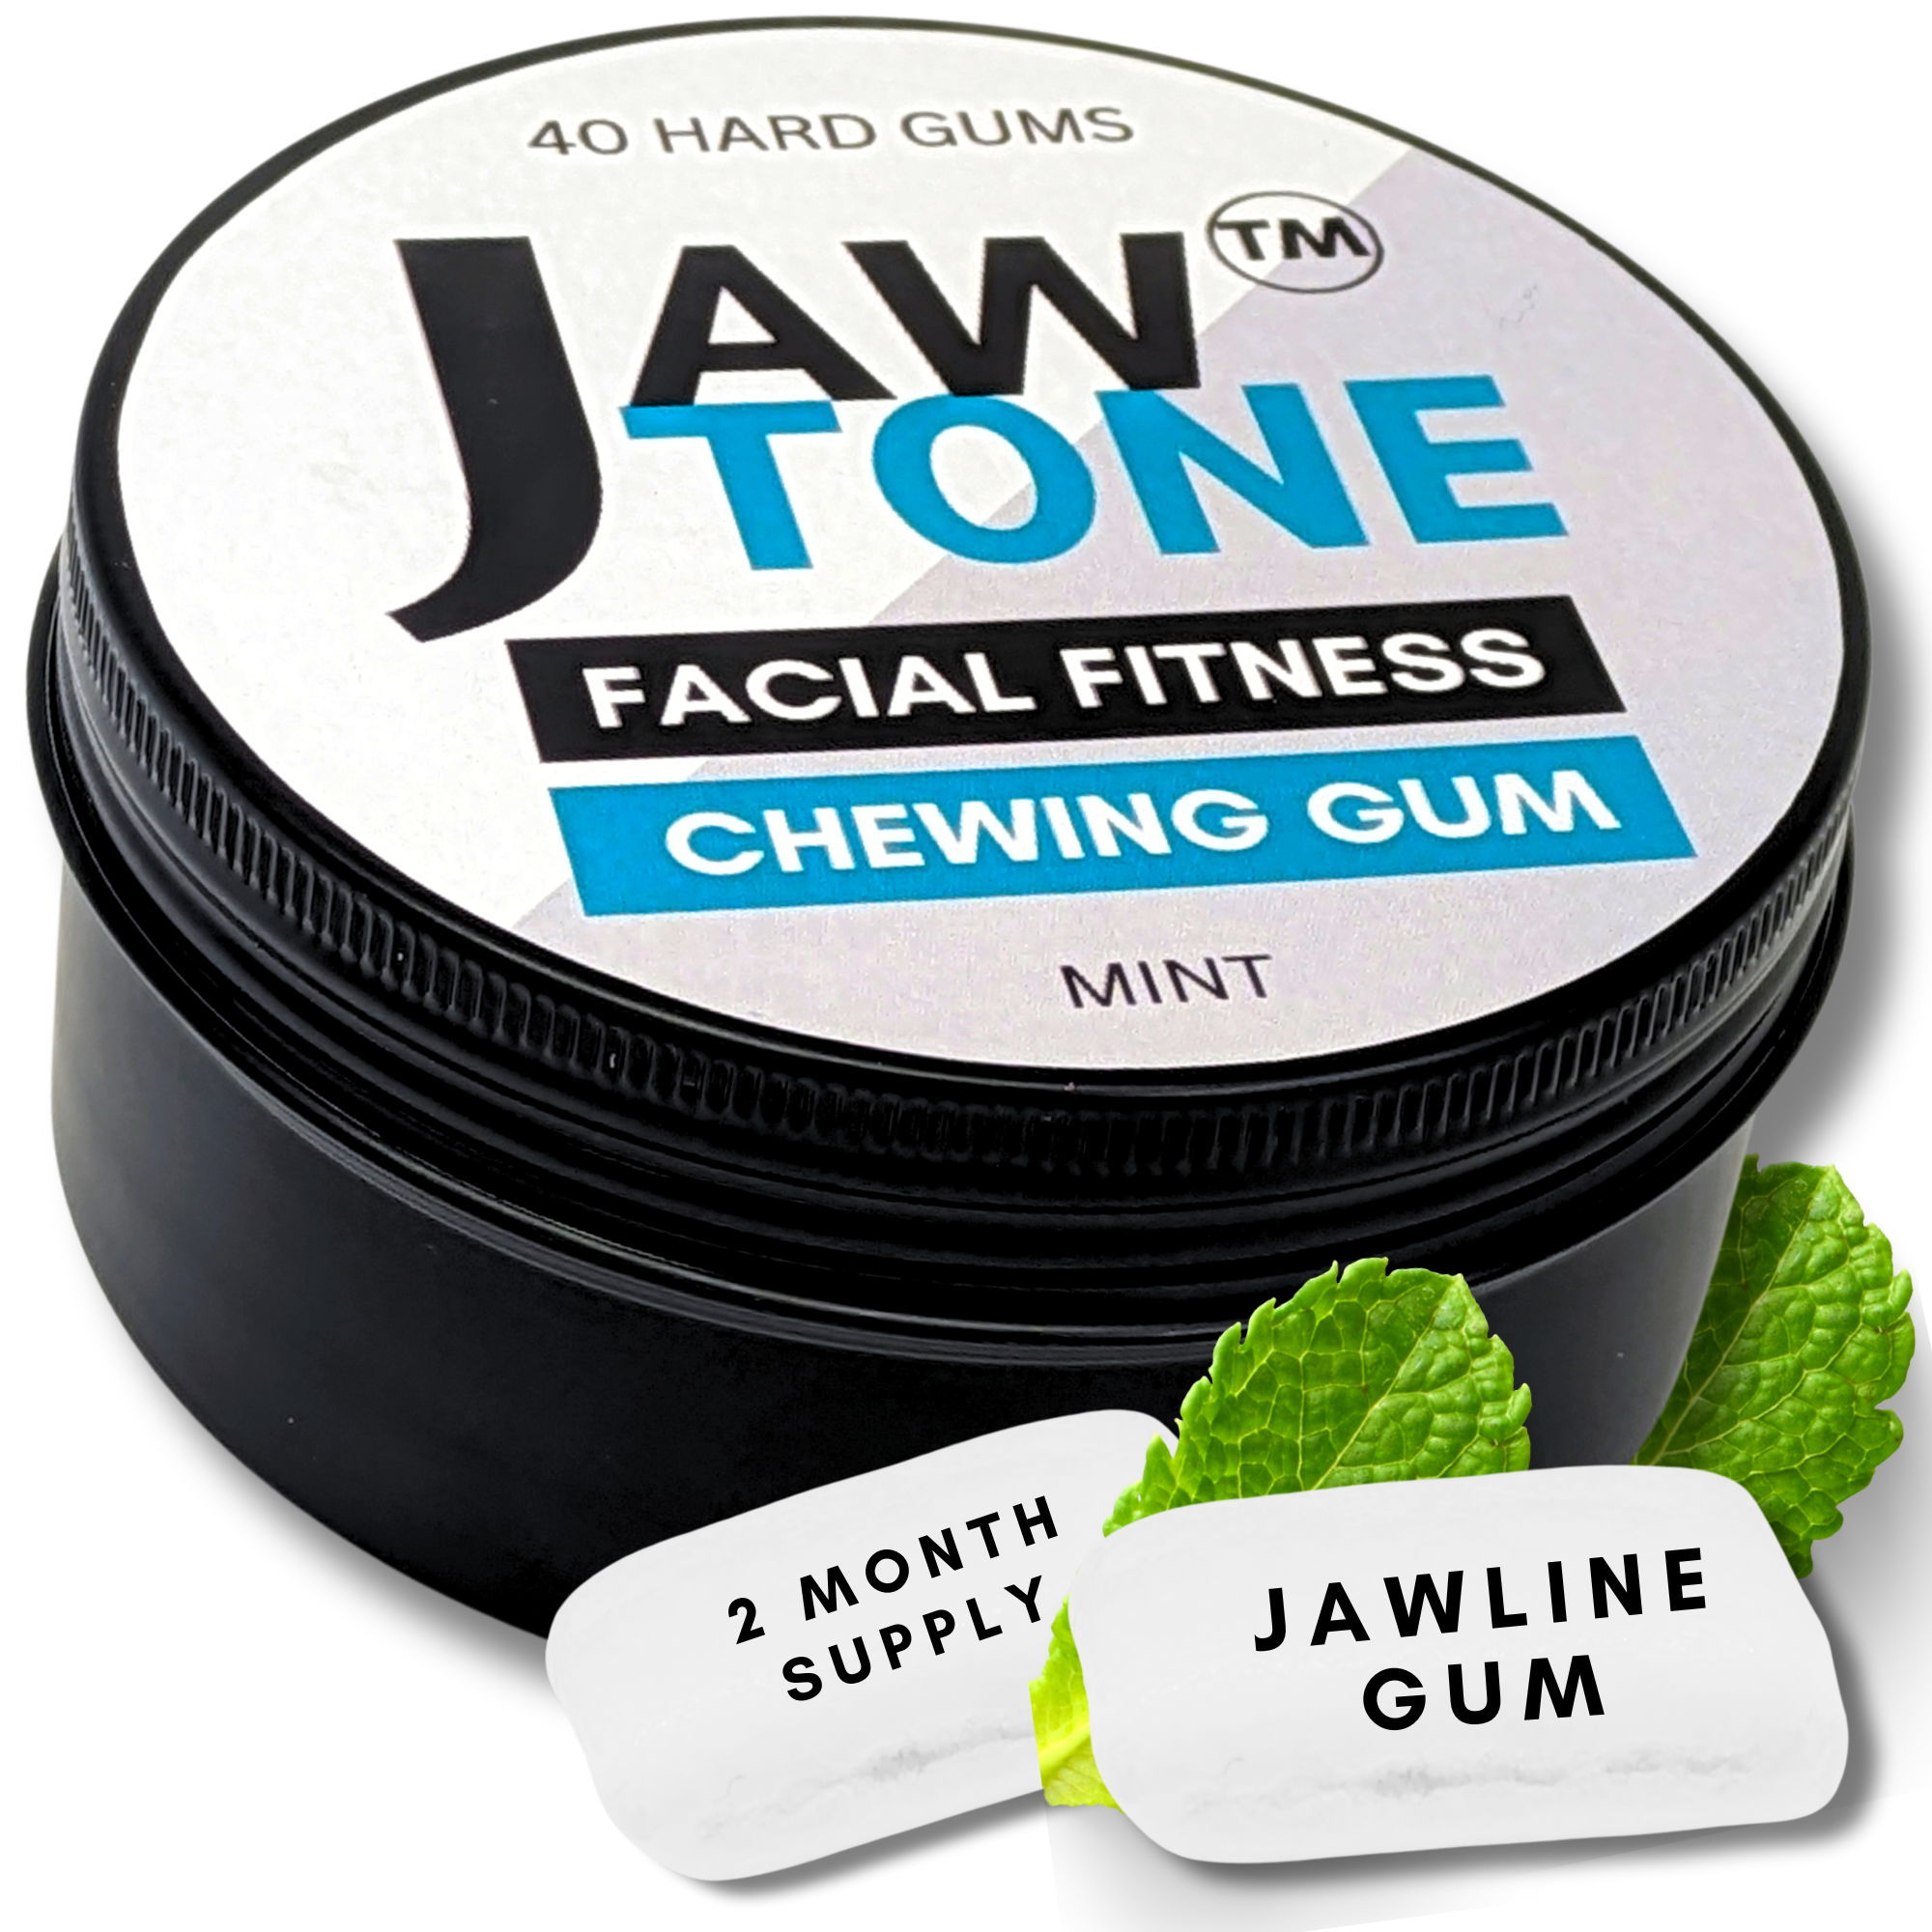 Jawliner Fitness Chewing-Gum